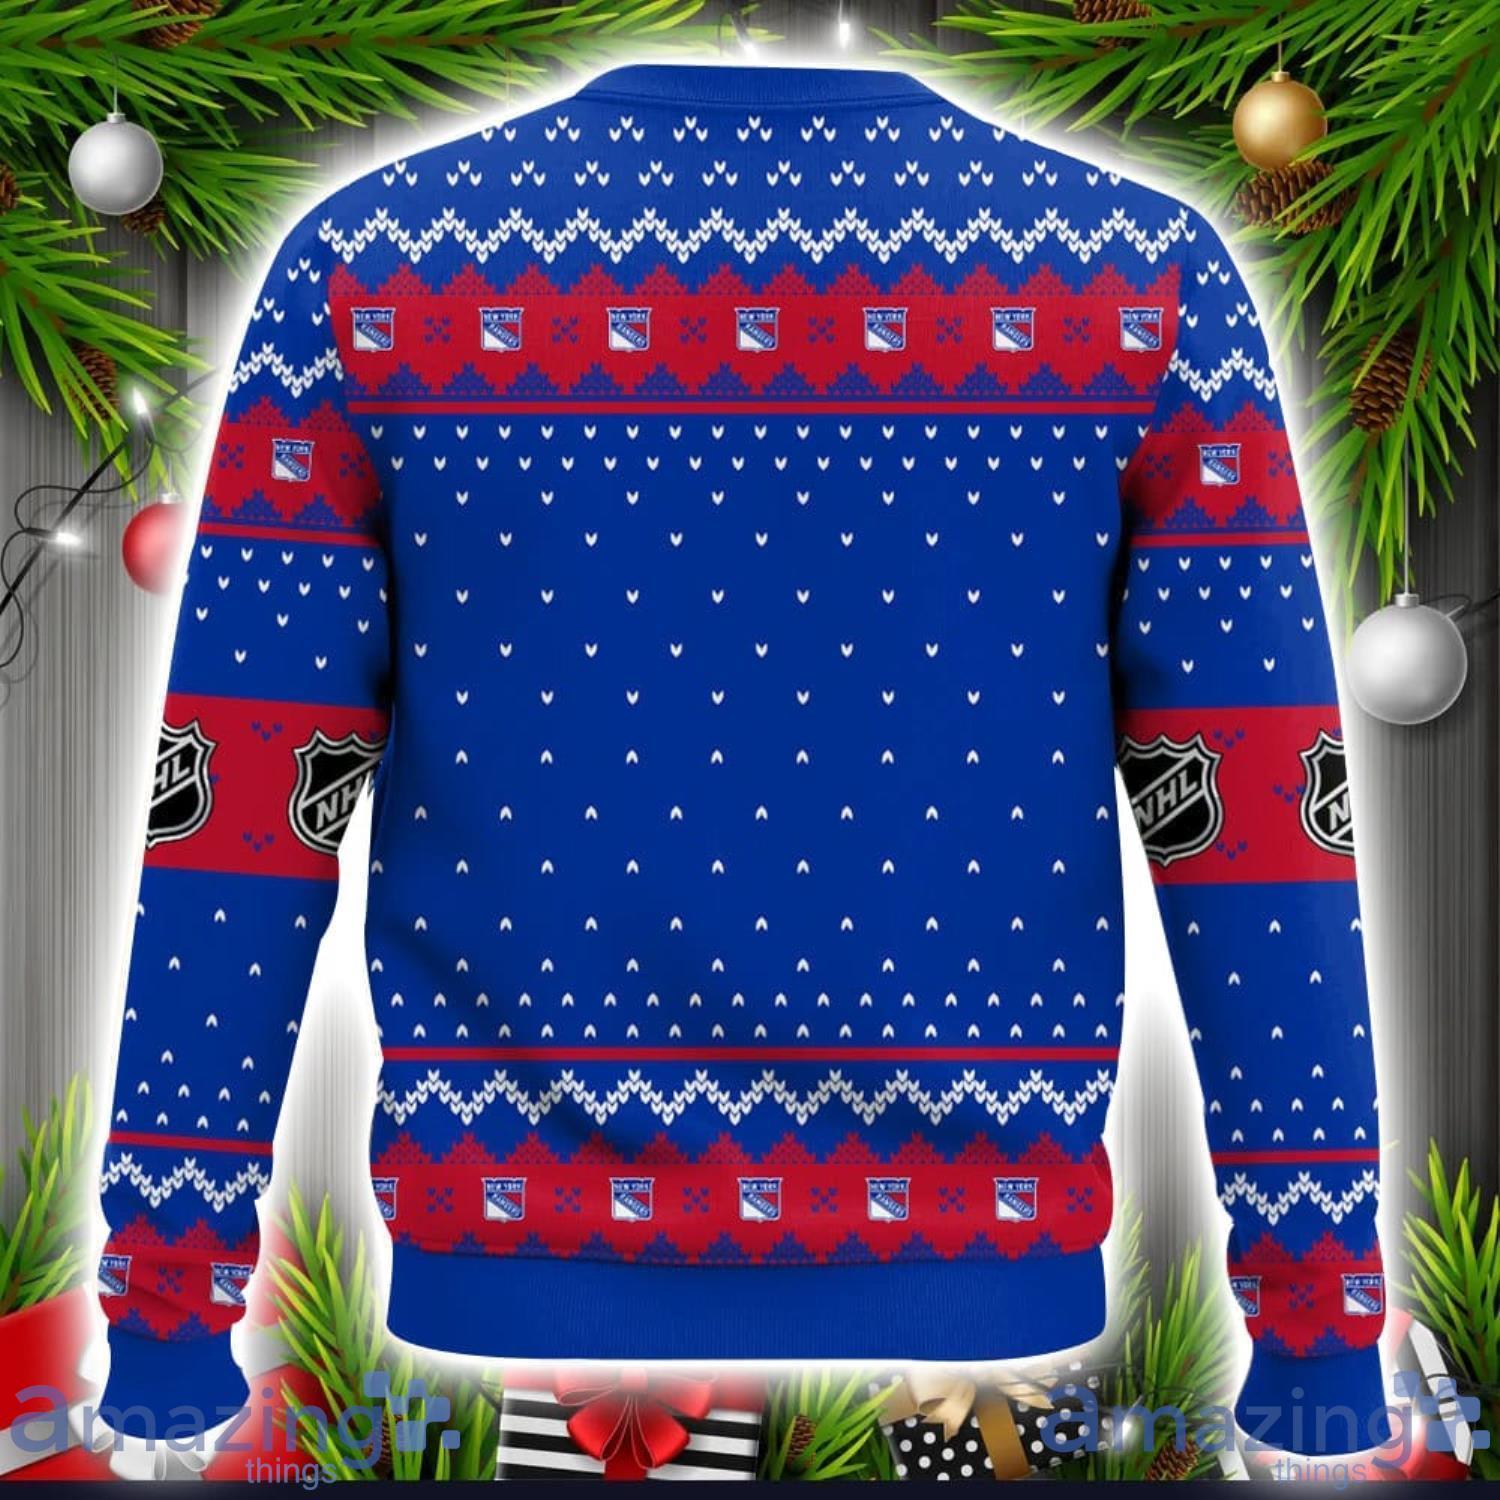 NHLNew York Rangers Ugly Christmas Sweater Xmas Gift Ideas Men And Women Sweater Gift For Christmas Product Photo 1